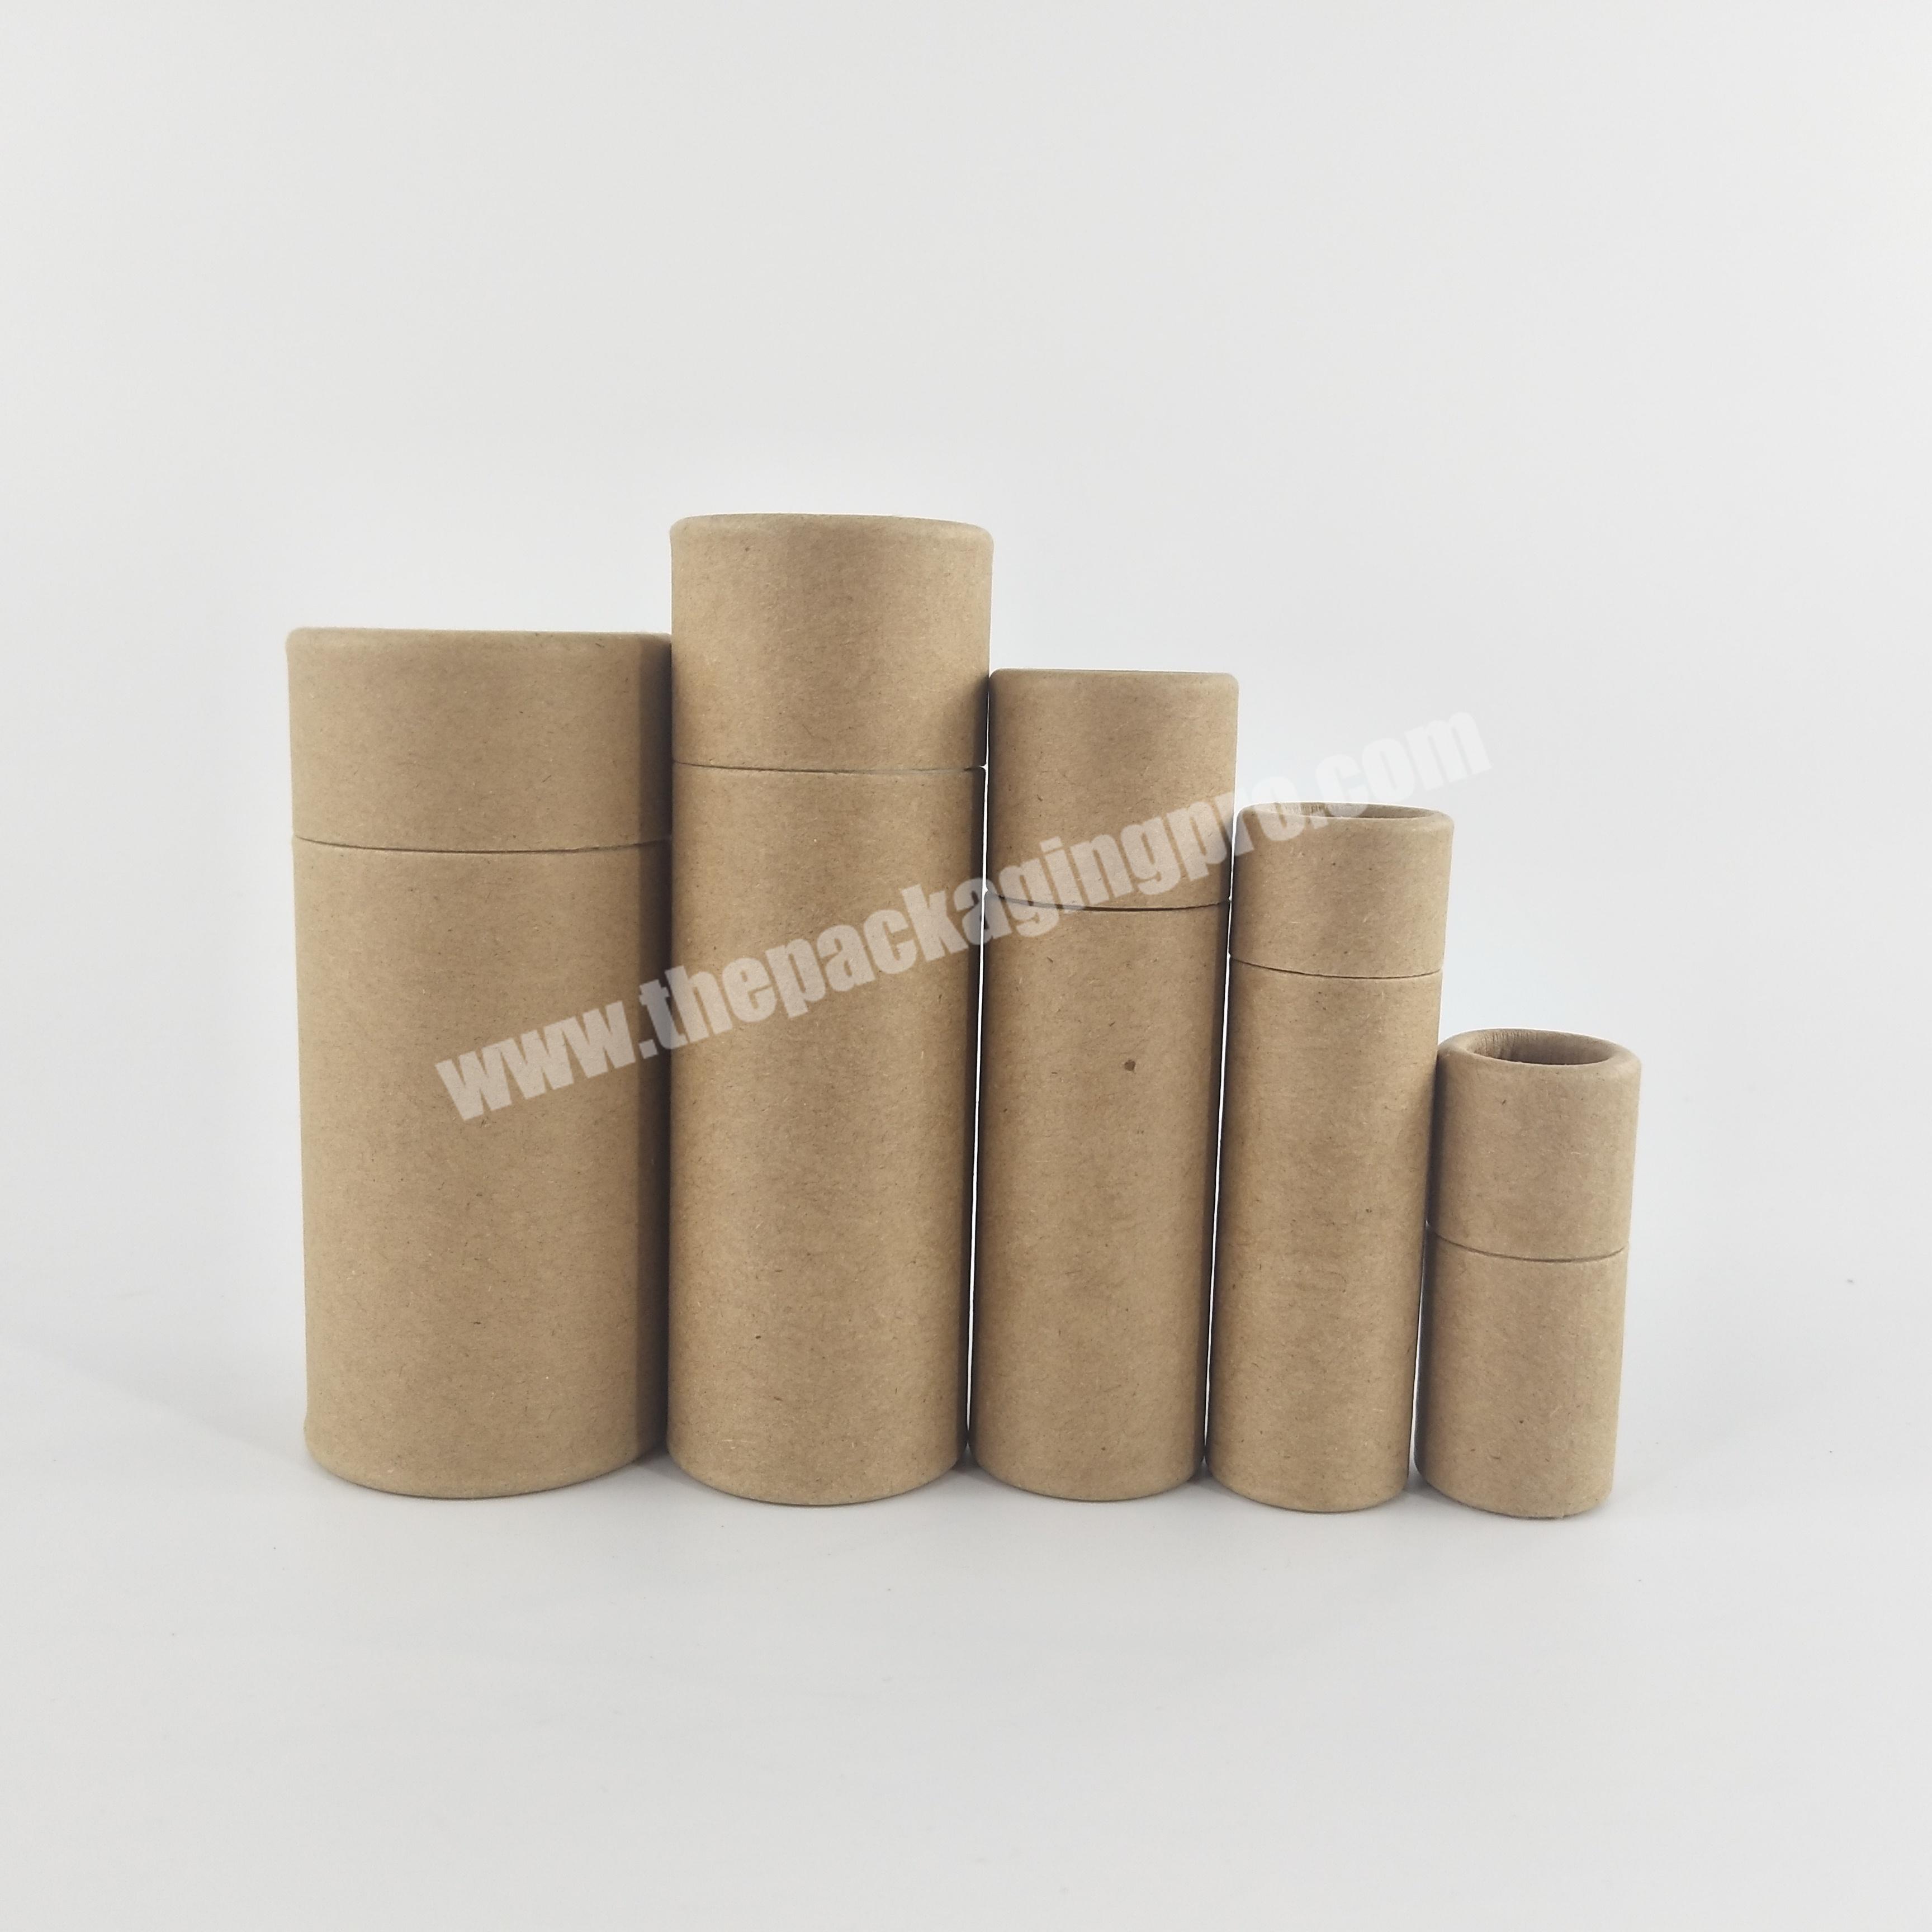 100% biodegradable packaging cardboard push up deodorant stick containers white black brown kraft lip balm paper tube